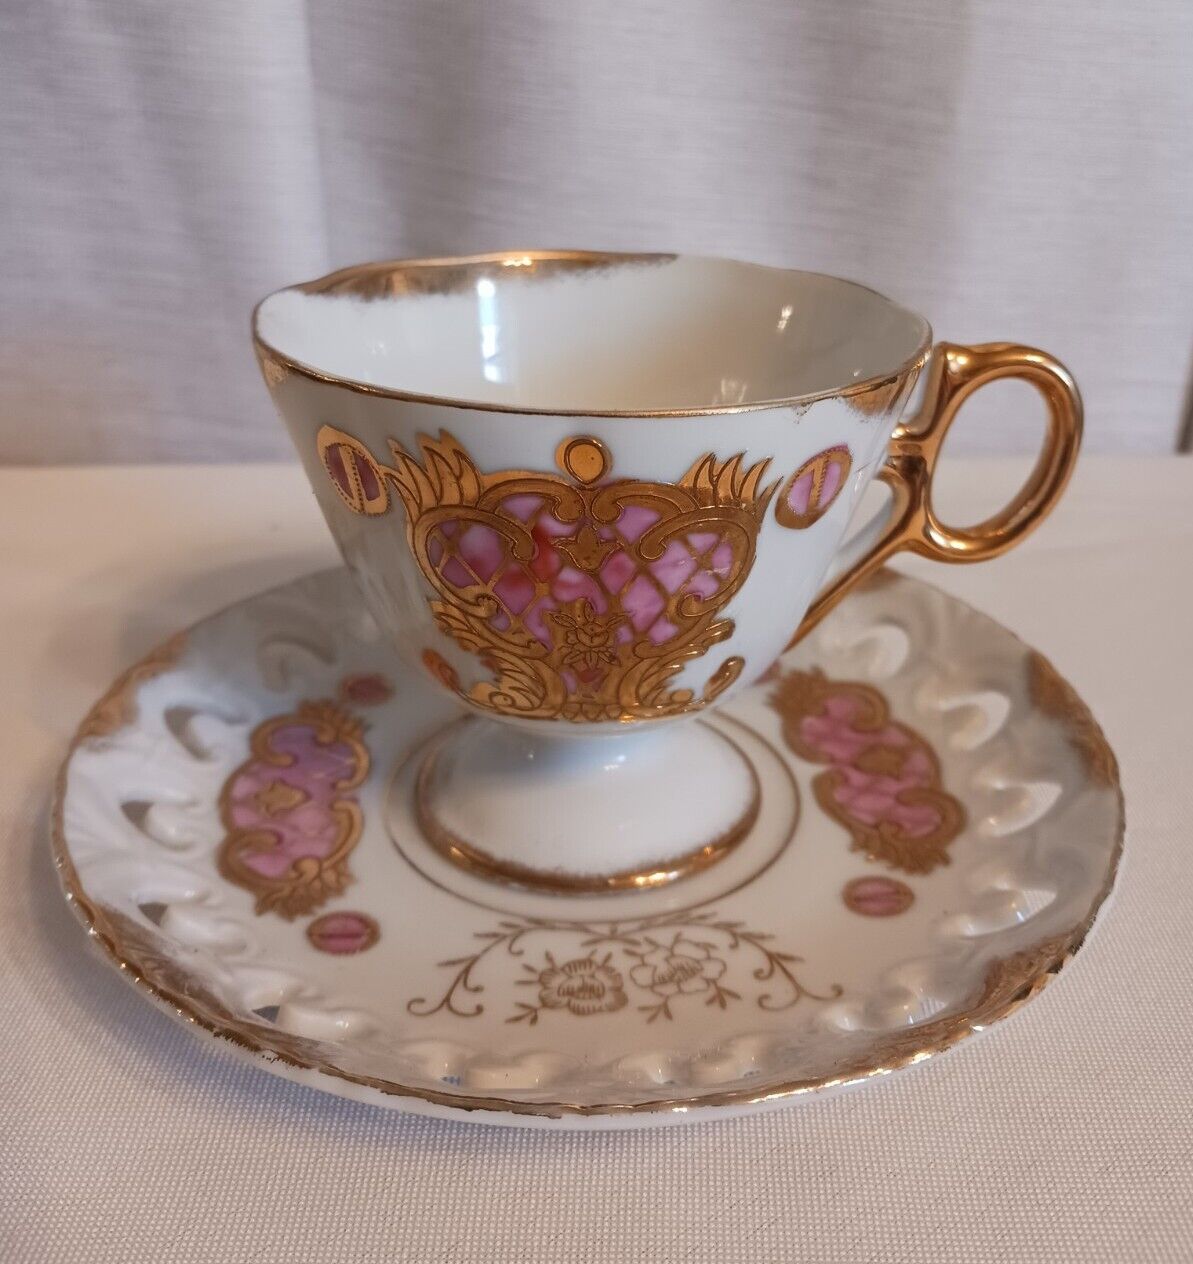 Beautiful Lefton Fancy Footed Vintage Teacup and Saucer With Gold and Cut Outs